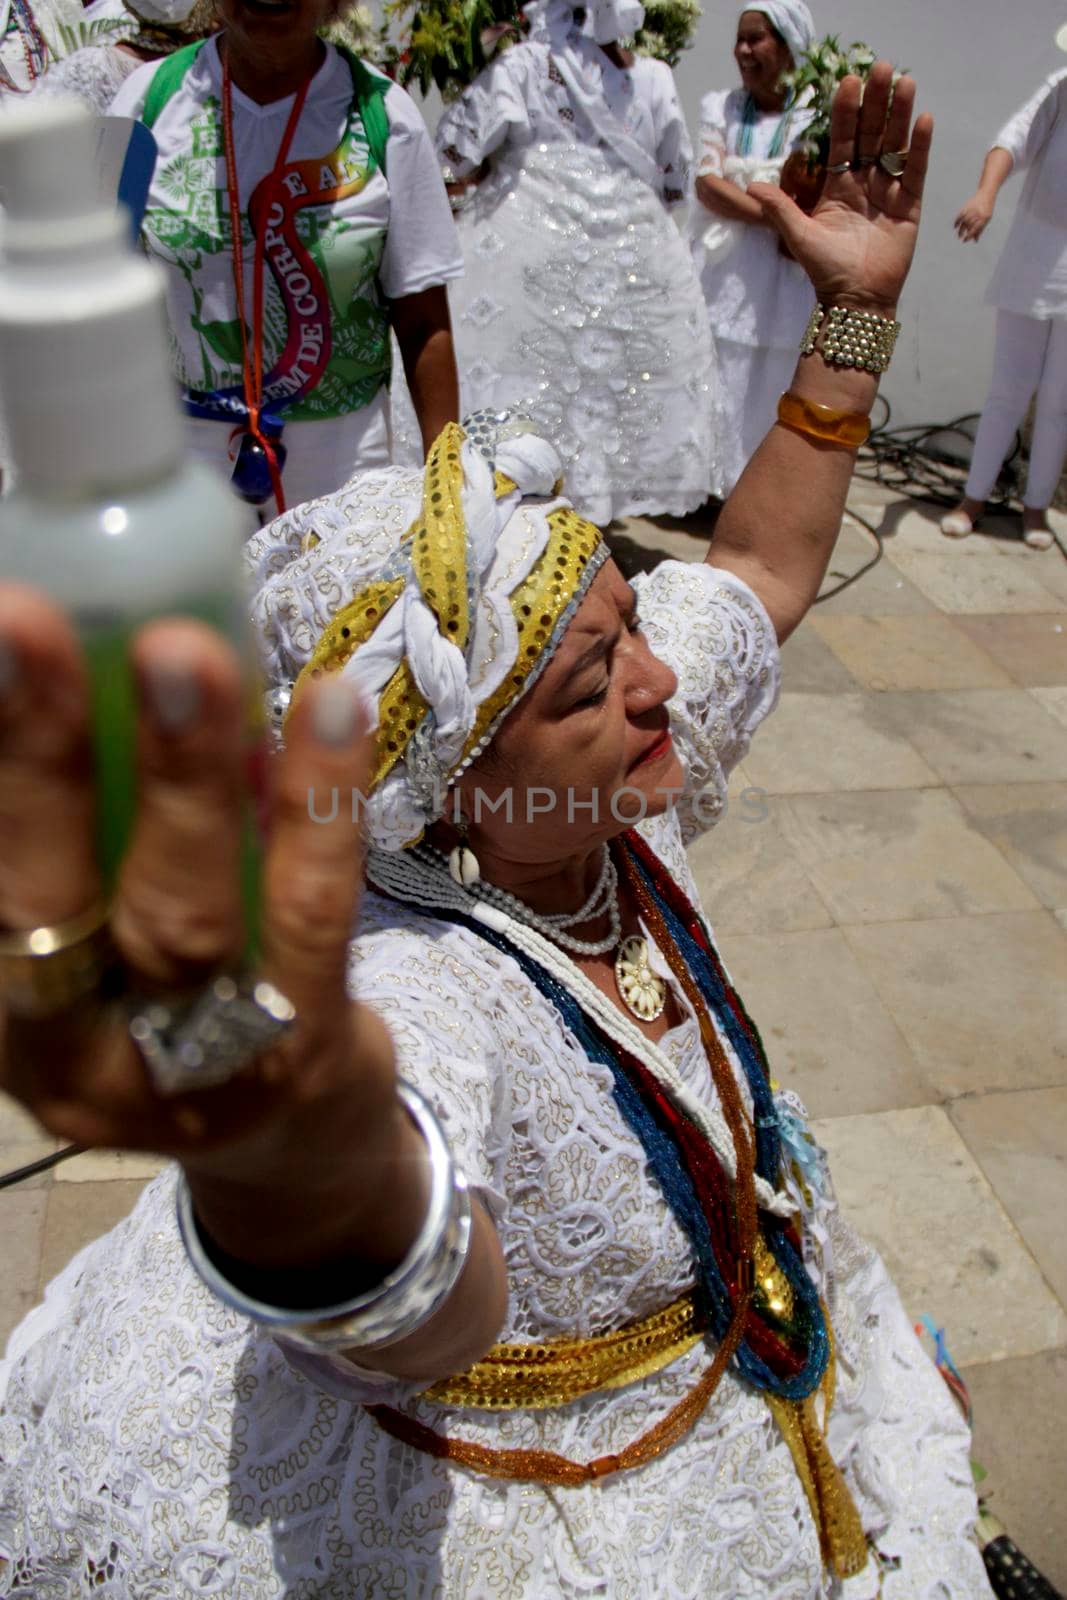 salvador, bahia / brazil - january 15, 2015: Baianas wash the stairs of the Church of Bonfim, during traditional party for Catholics and Candomble fan.